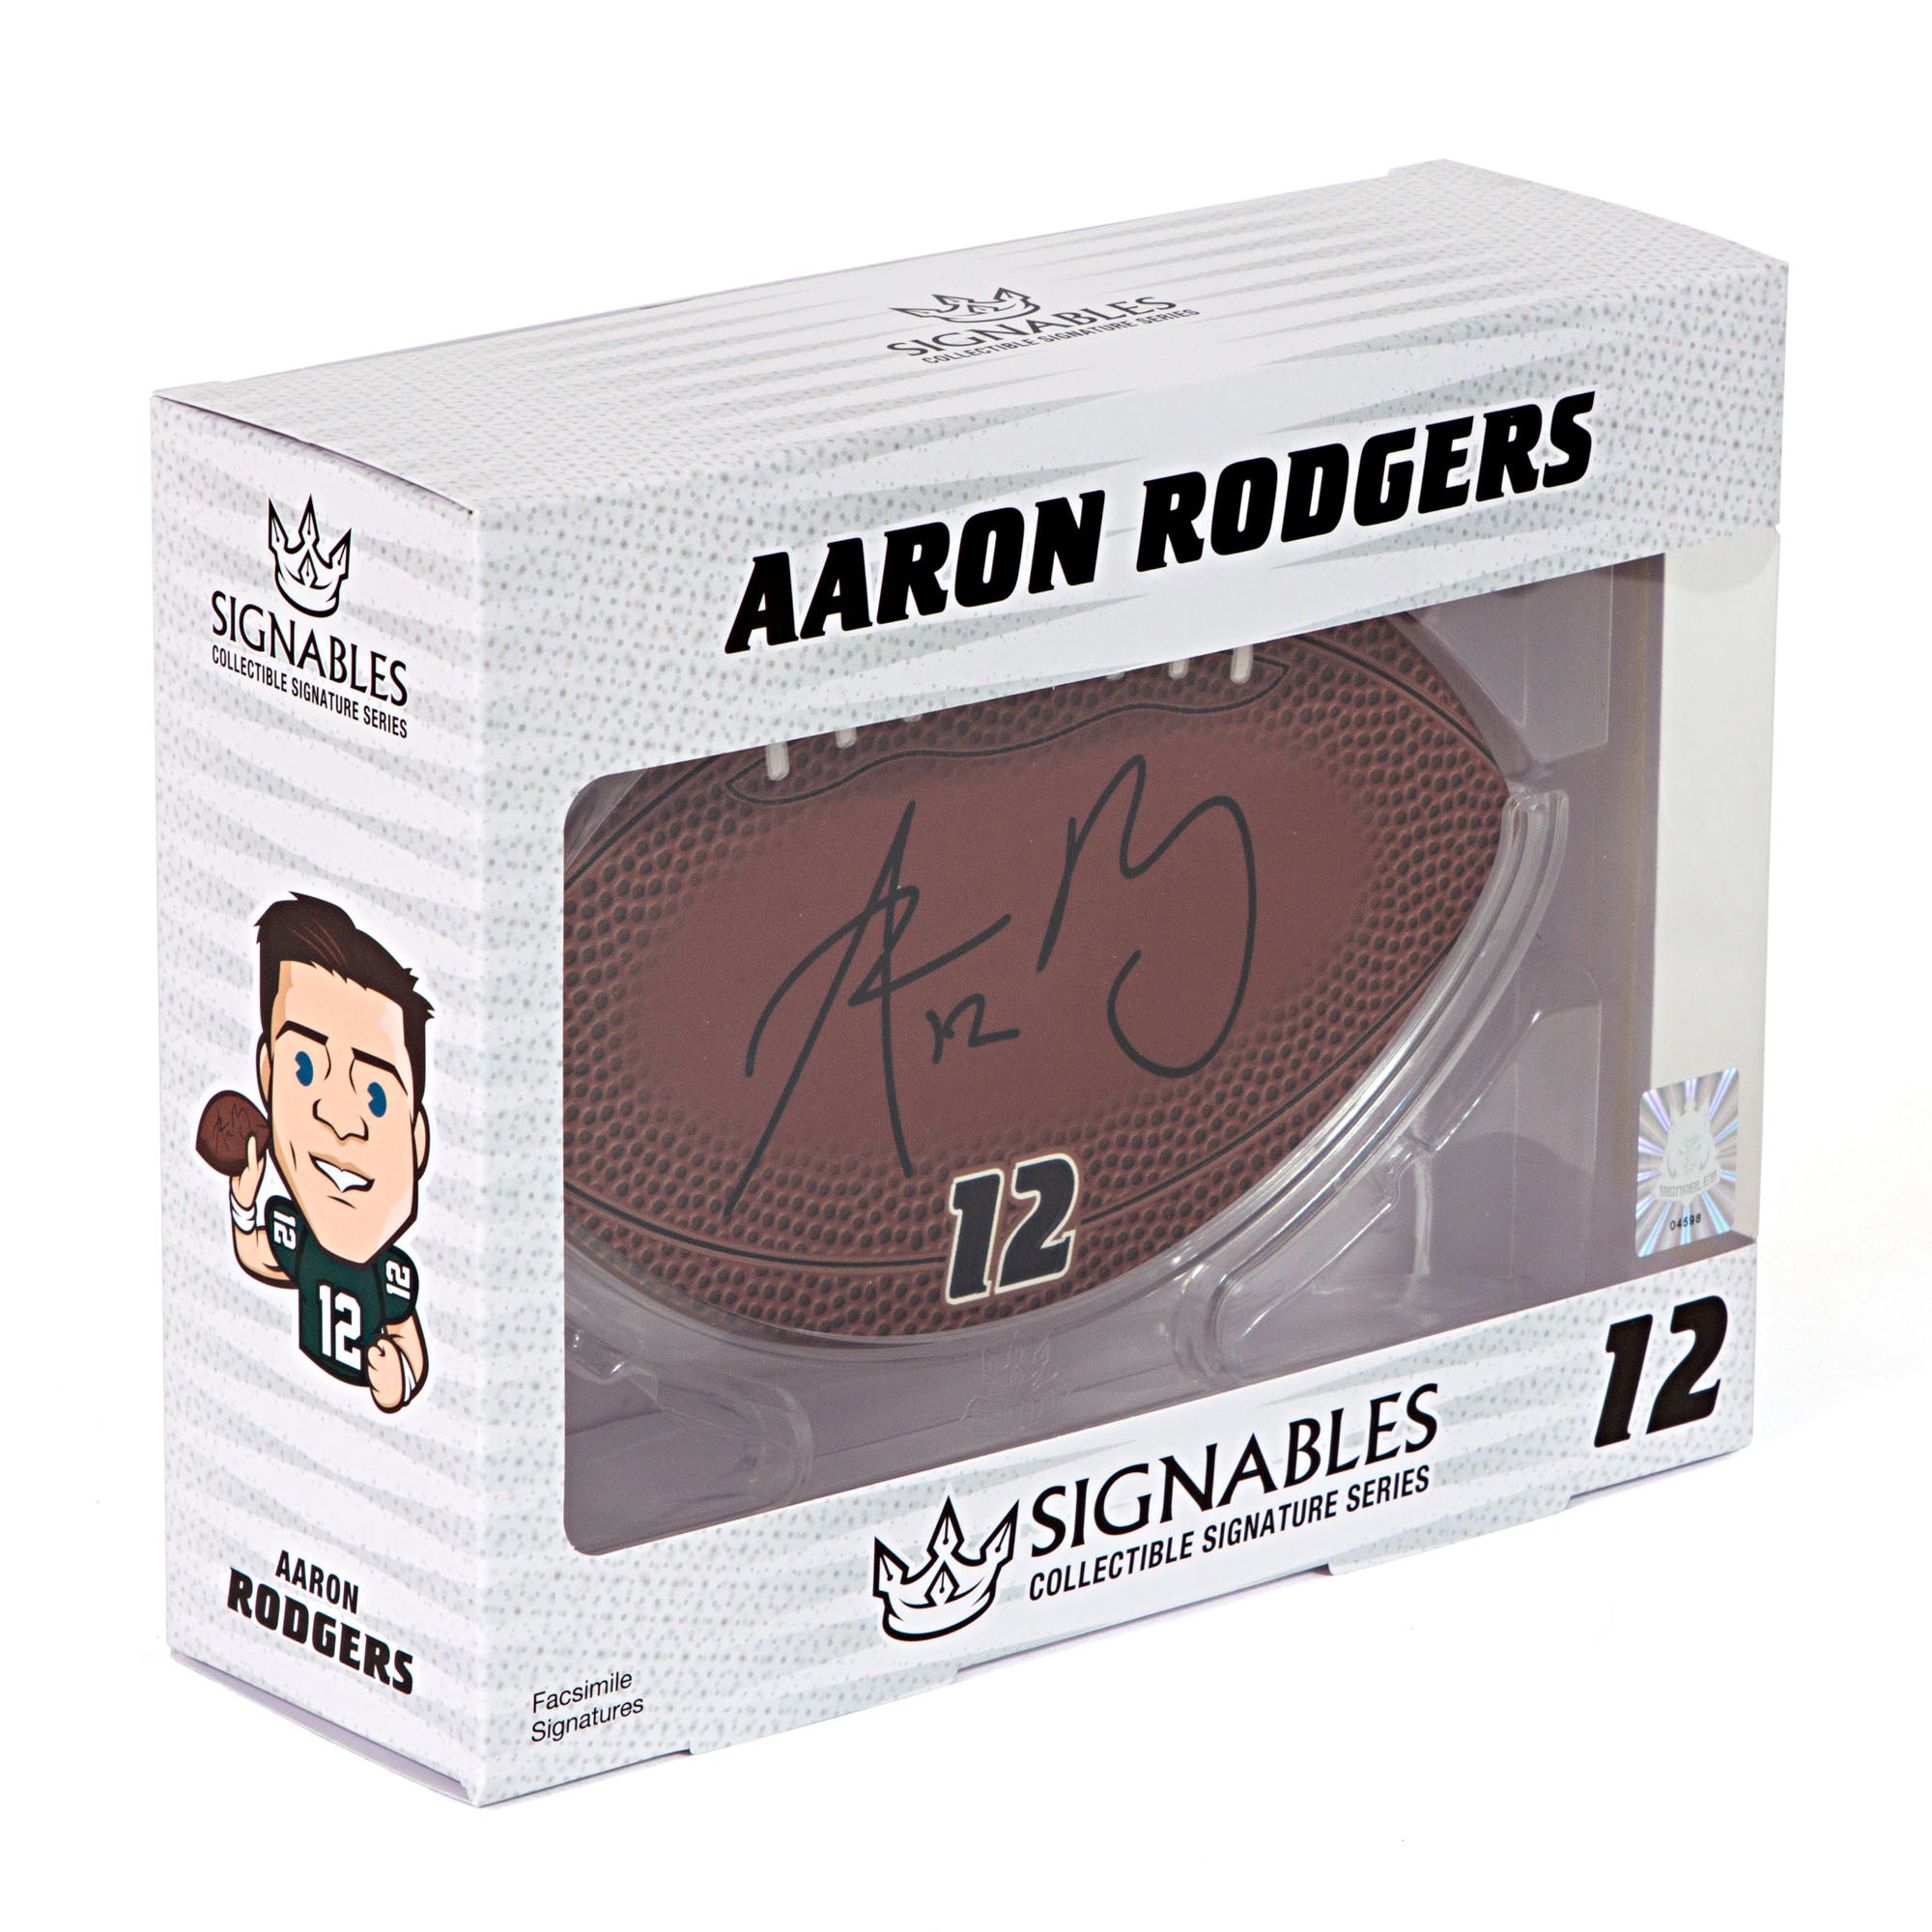 Image of Aaron Rodgers - NFLPA Signables Collectible